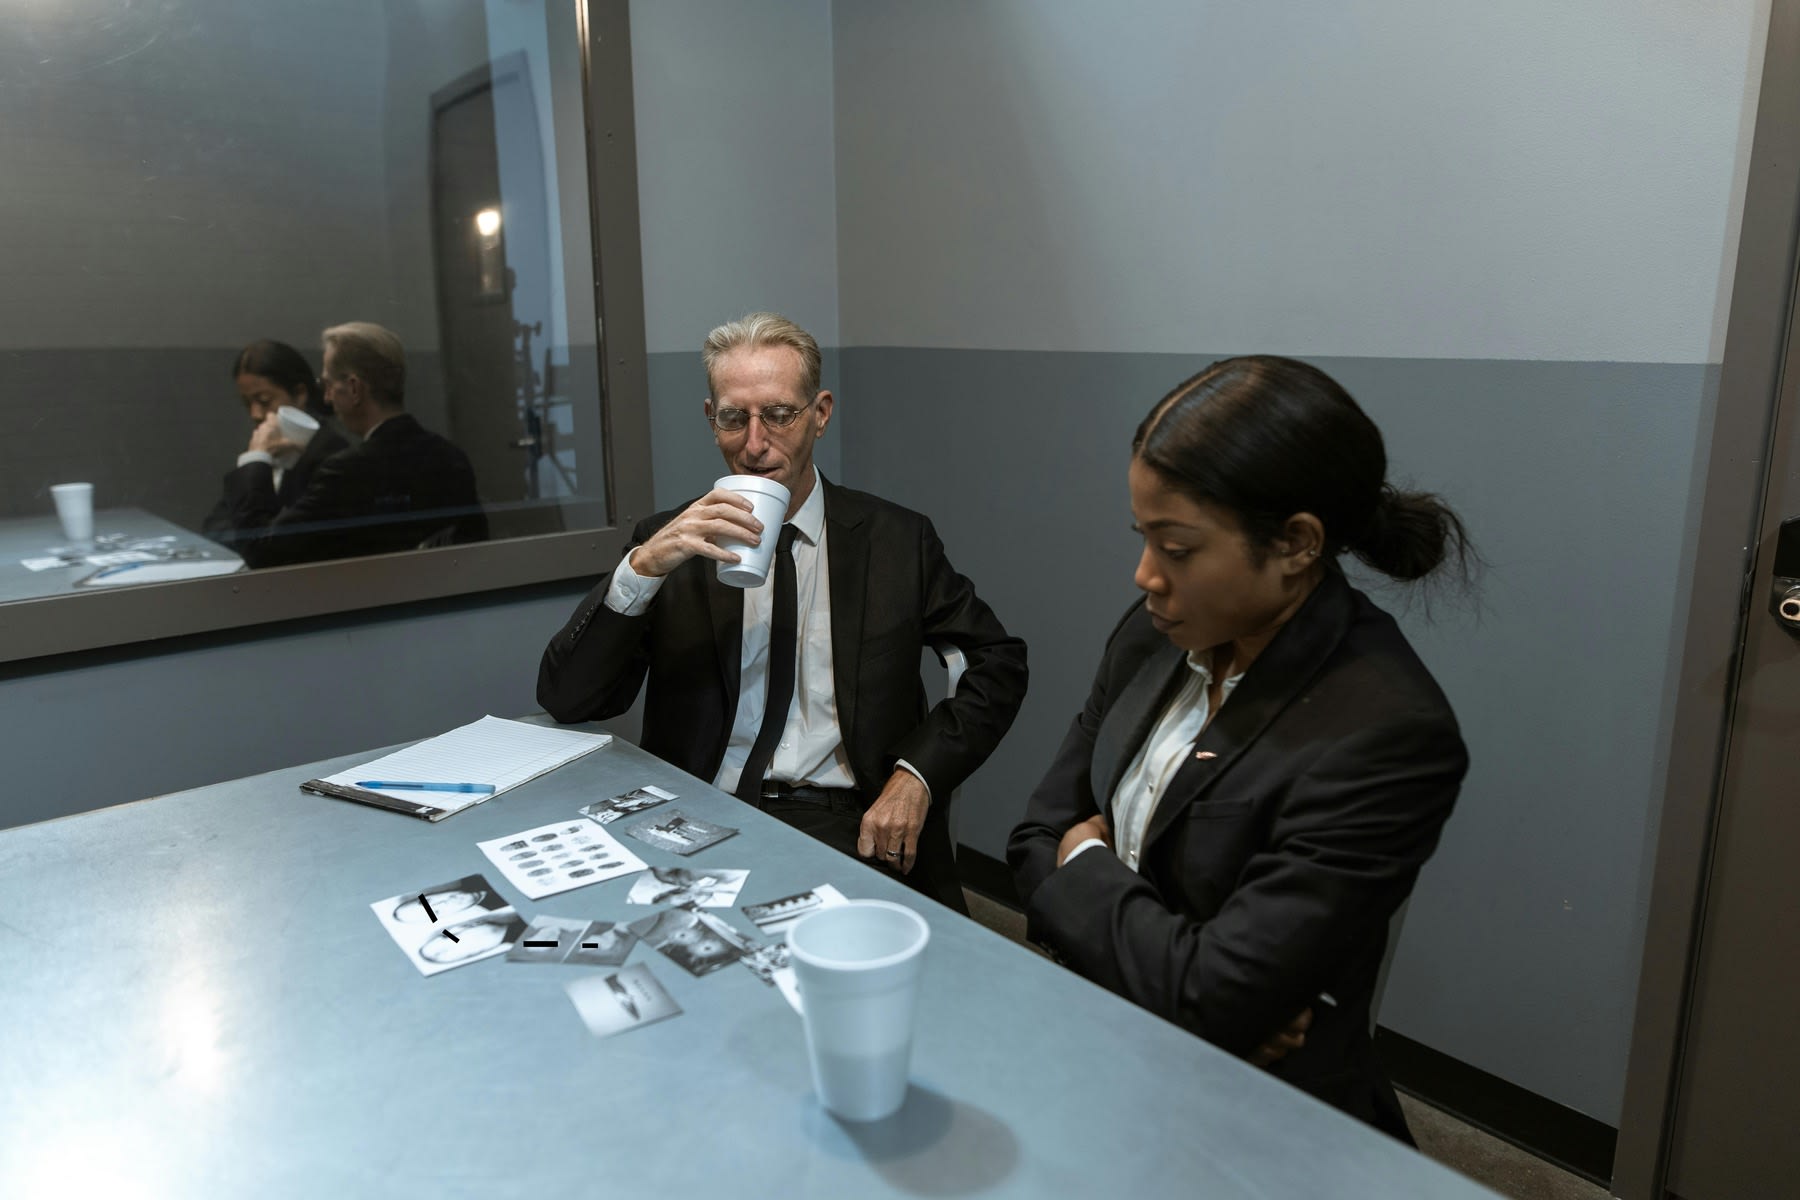 A man and a woman wearing suits, looking at images of suspects in the interrogation room